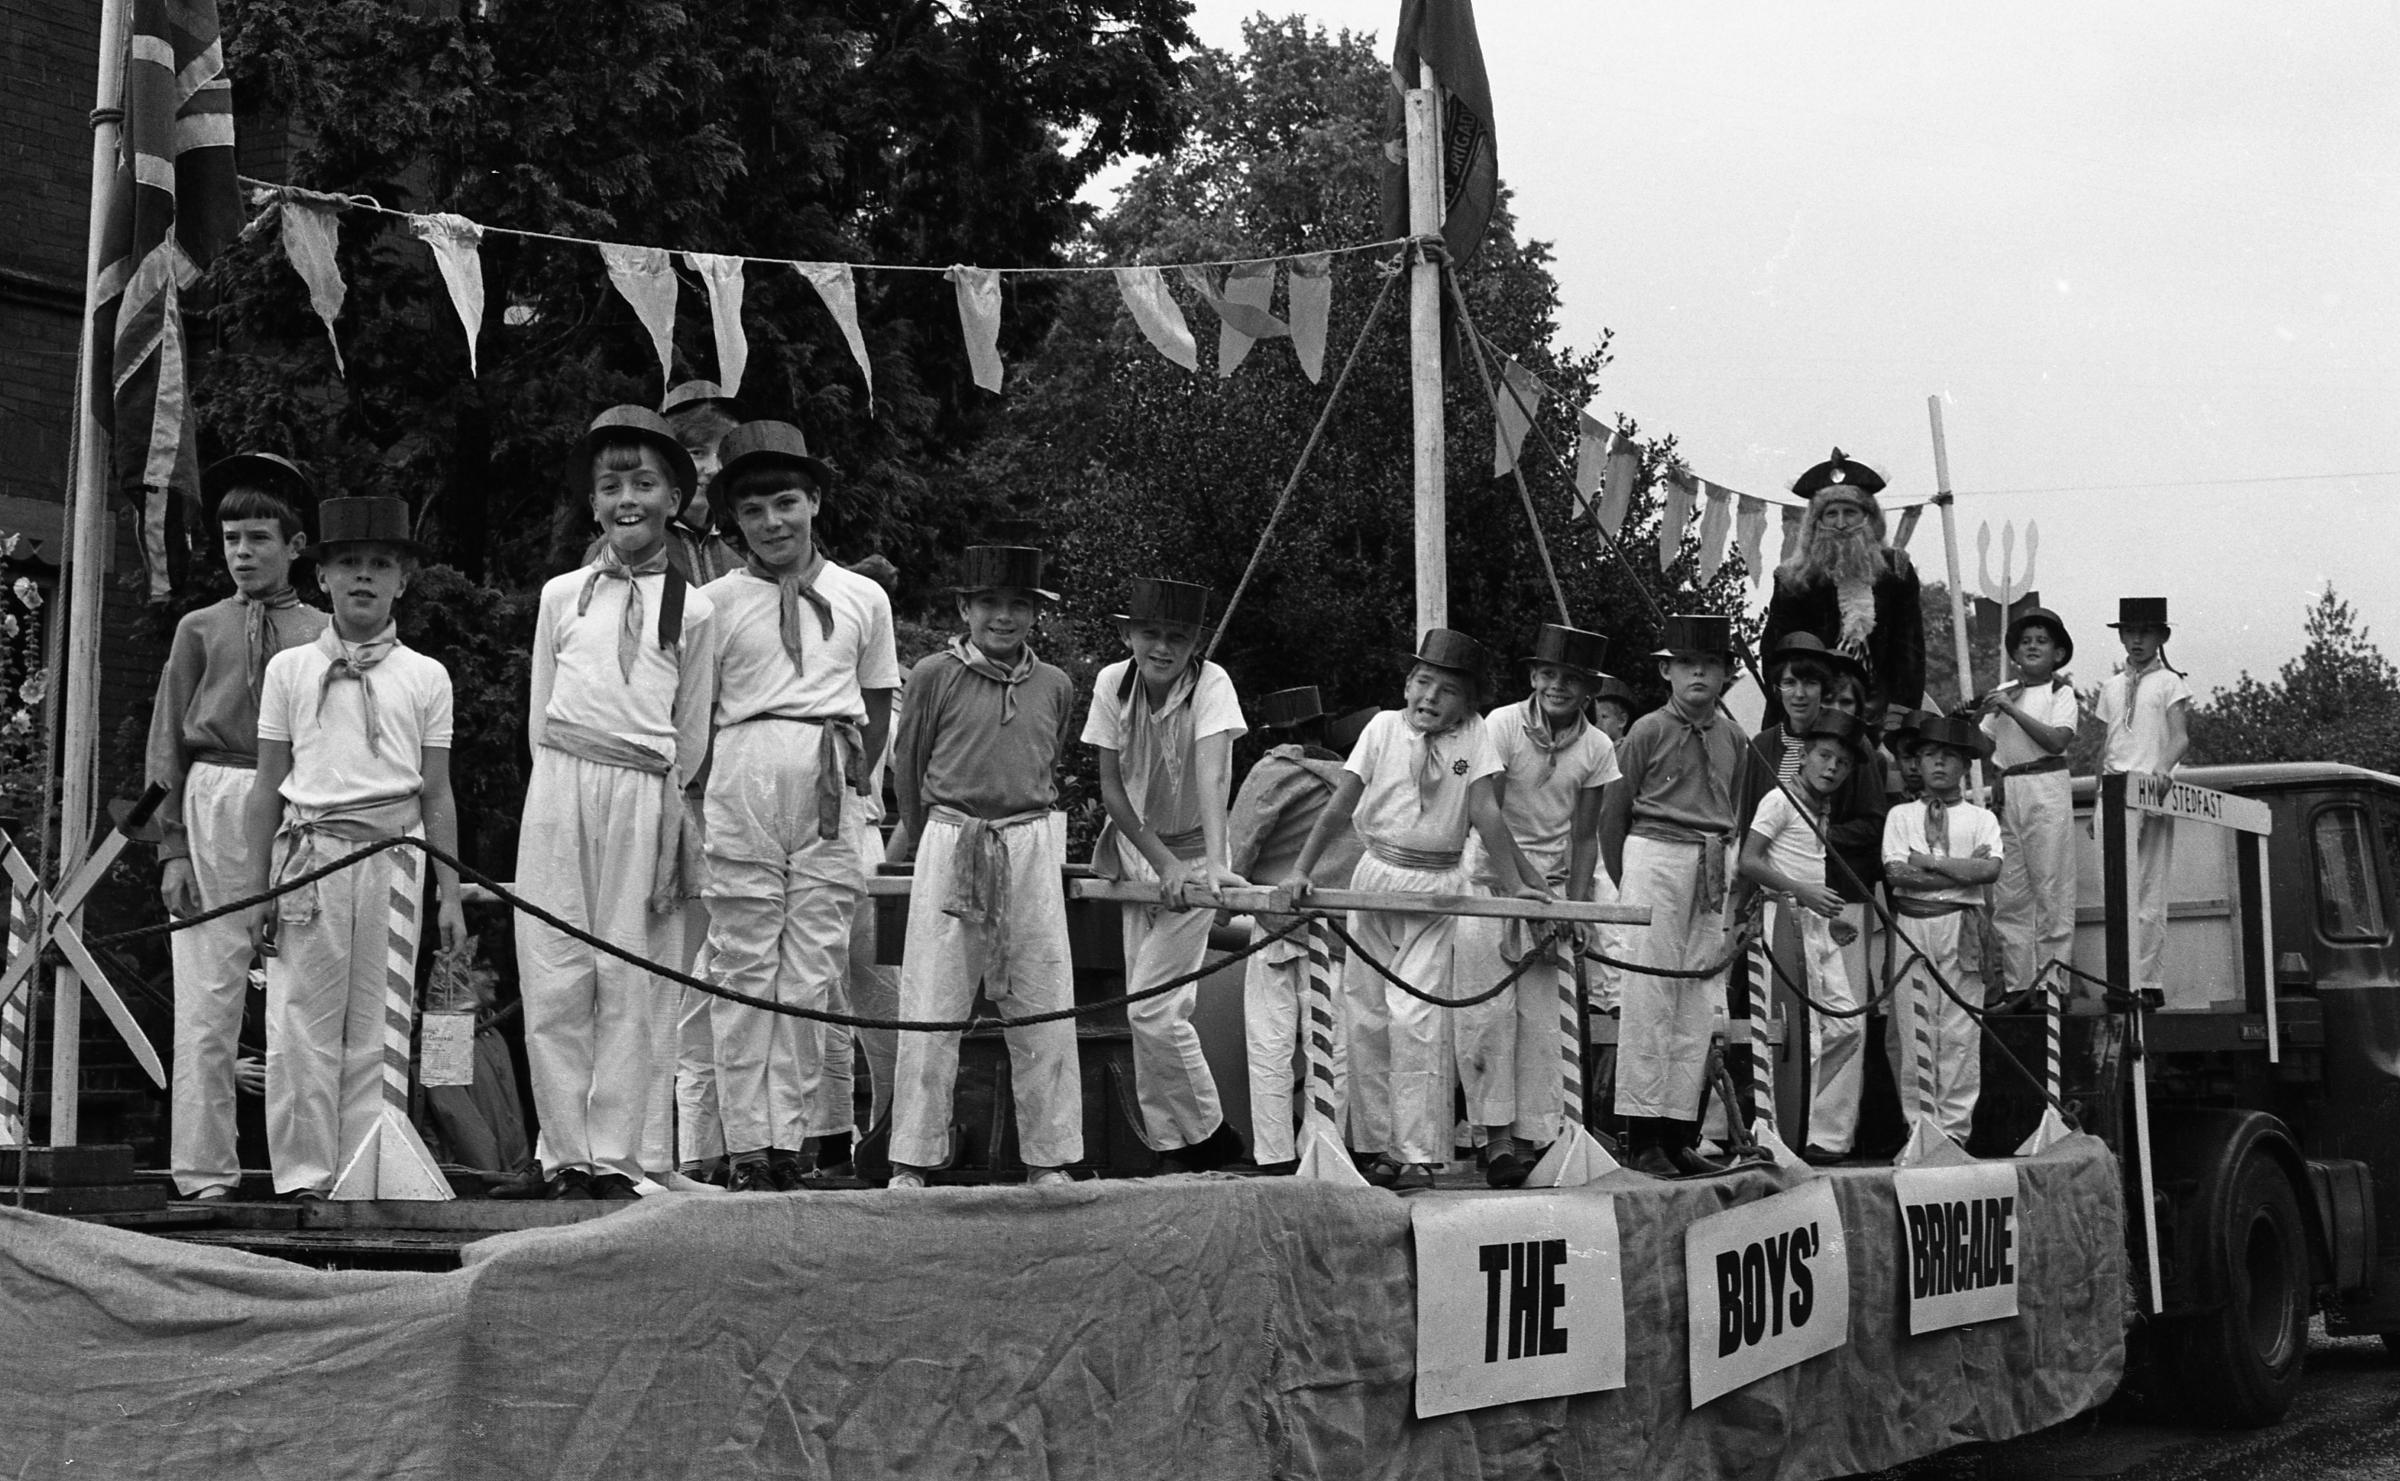 Eastleigh Childrens Carnival 1970. The Boys Brigade. August 22, 1970. THE SOUTHERN DAILY ECHO ARCHIVES. HAMPSHIRE HERITAGE SUPPLEMENT. Ref: 4410e